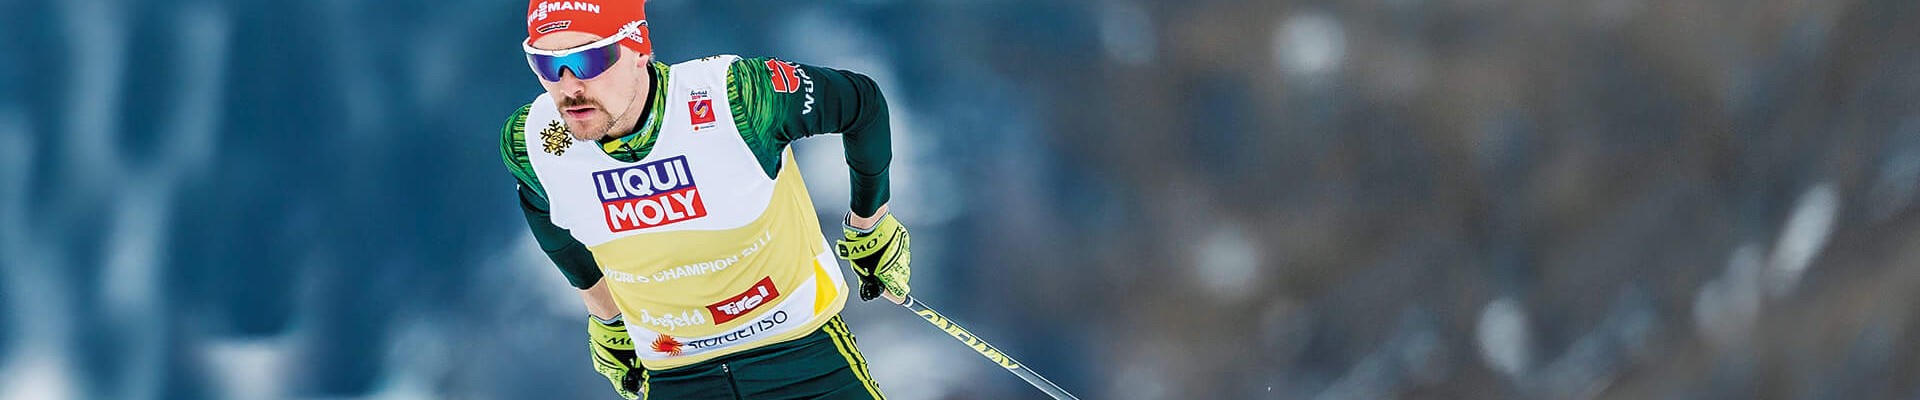 Fabian Riessle, together with Eric Frenzel, won gold in the team sprint at the Nordic World Ski Championships in Seefeld in 2019. Würth is a reliable and strong partner not only for its customers, but also in the sporting world, for example as one of the main sponsors of the German Ski Association.